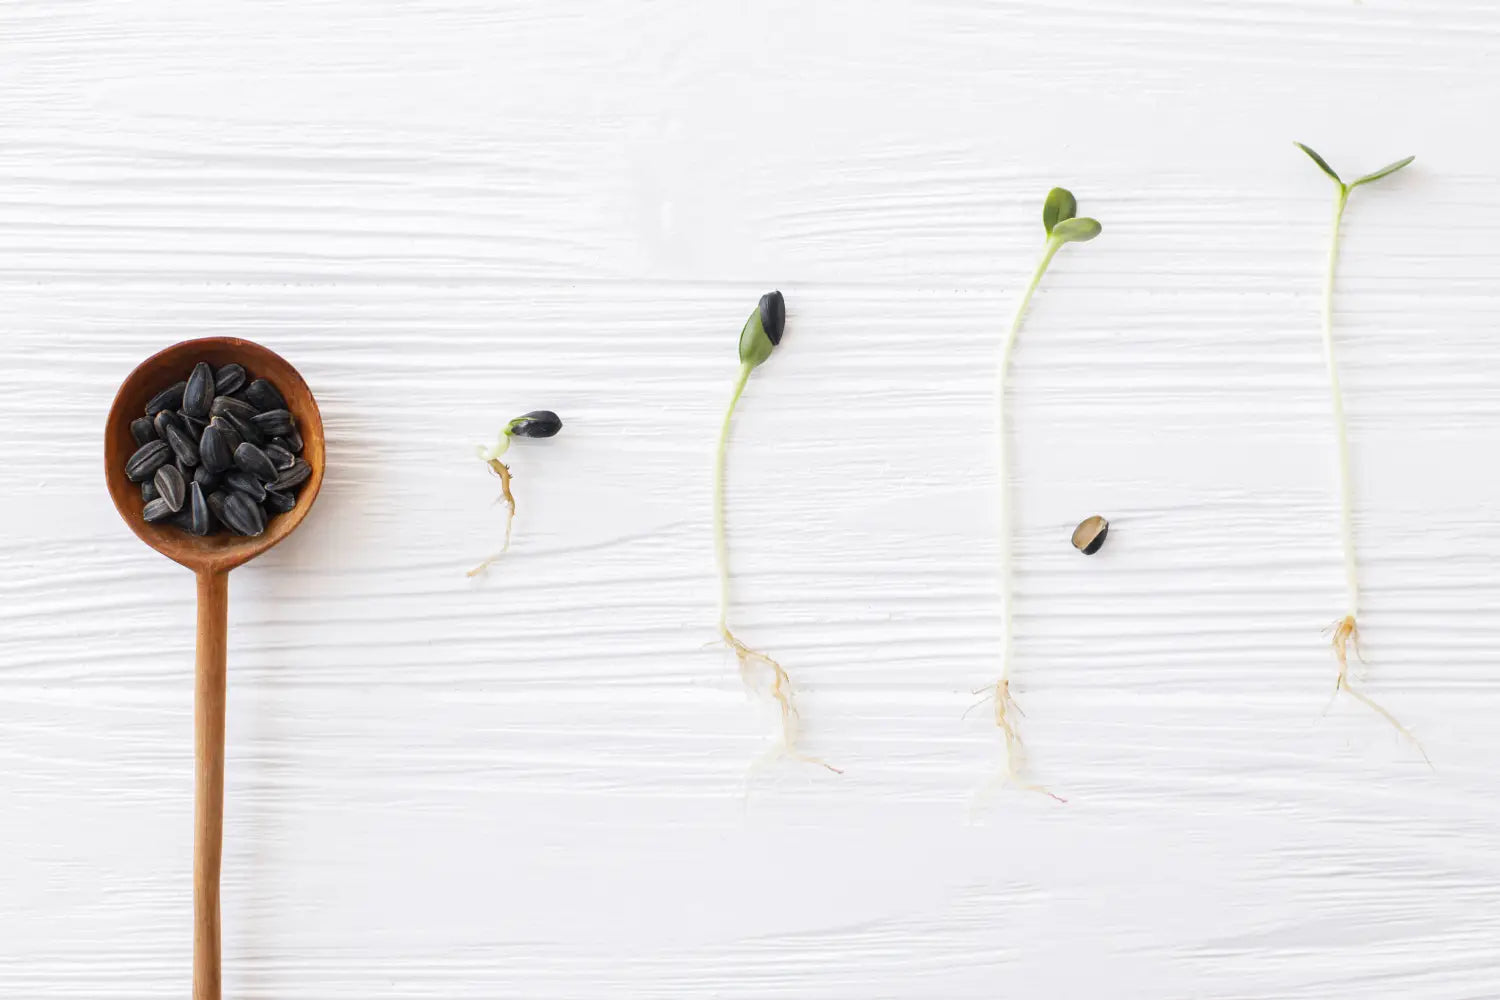 Growing Plant Stages Explained: From Seed to Bloom